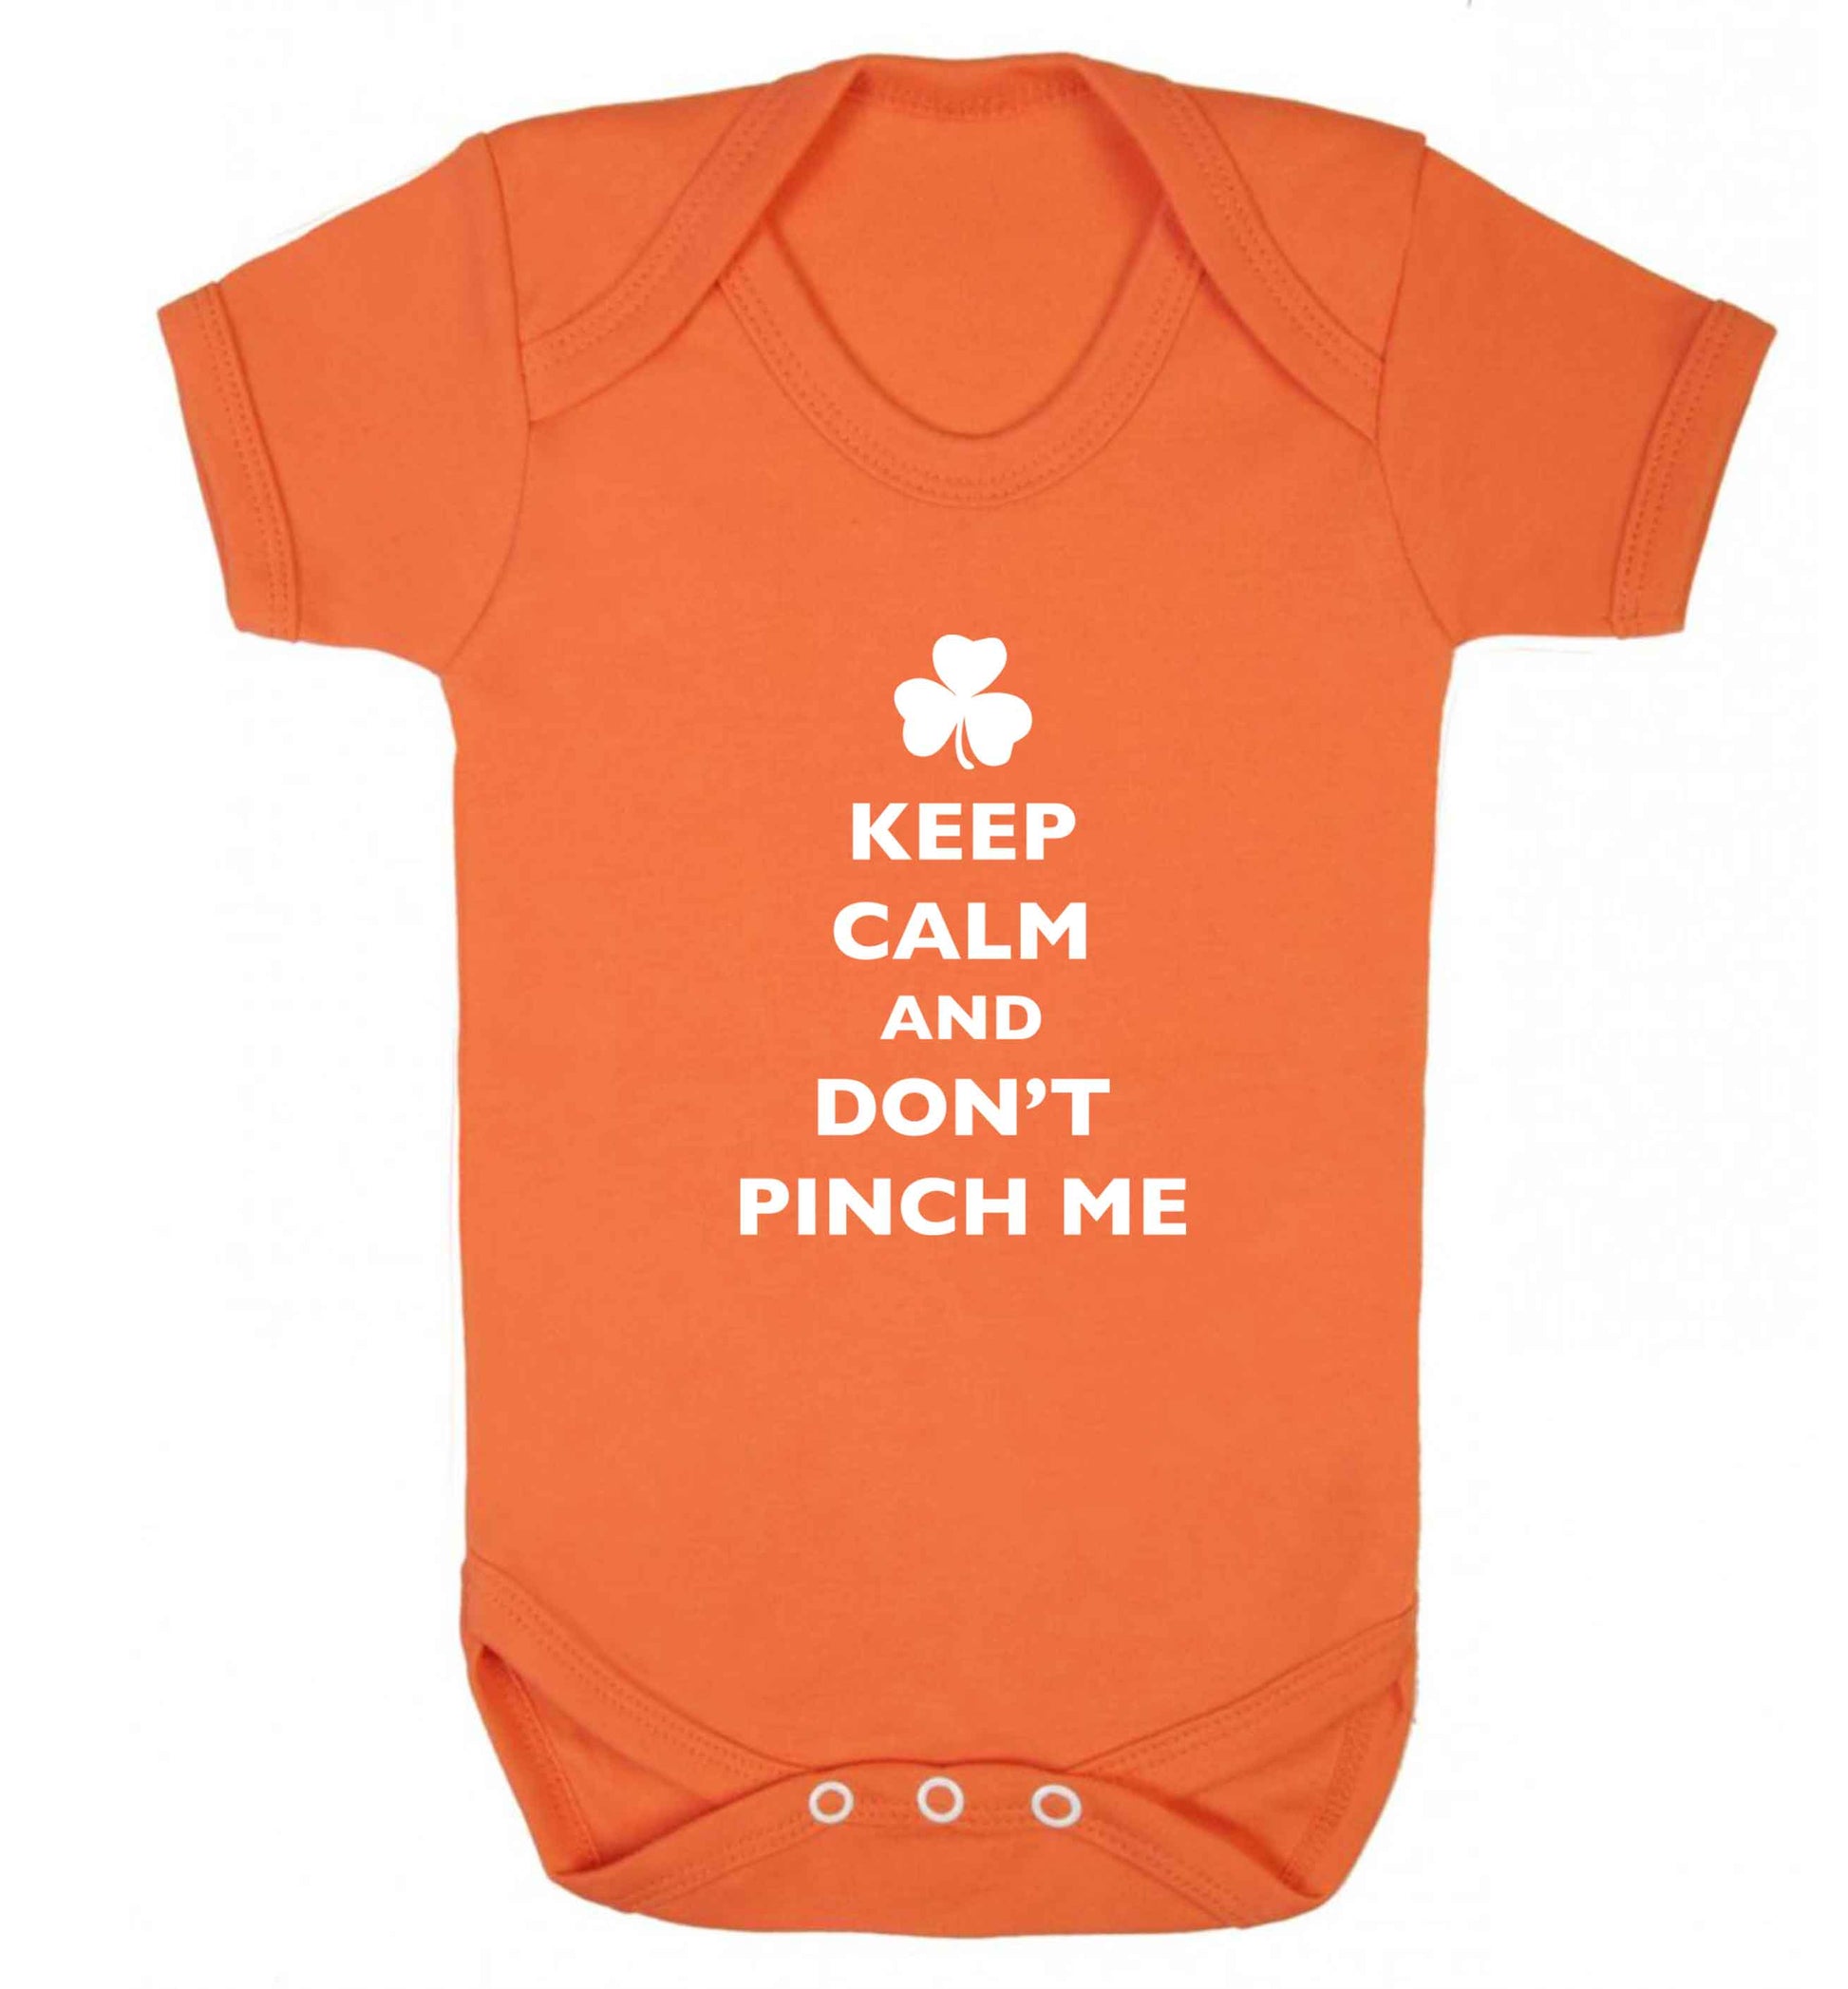 Keep calm and don't pinch me baby vest orange 18-24 months